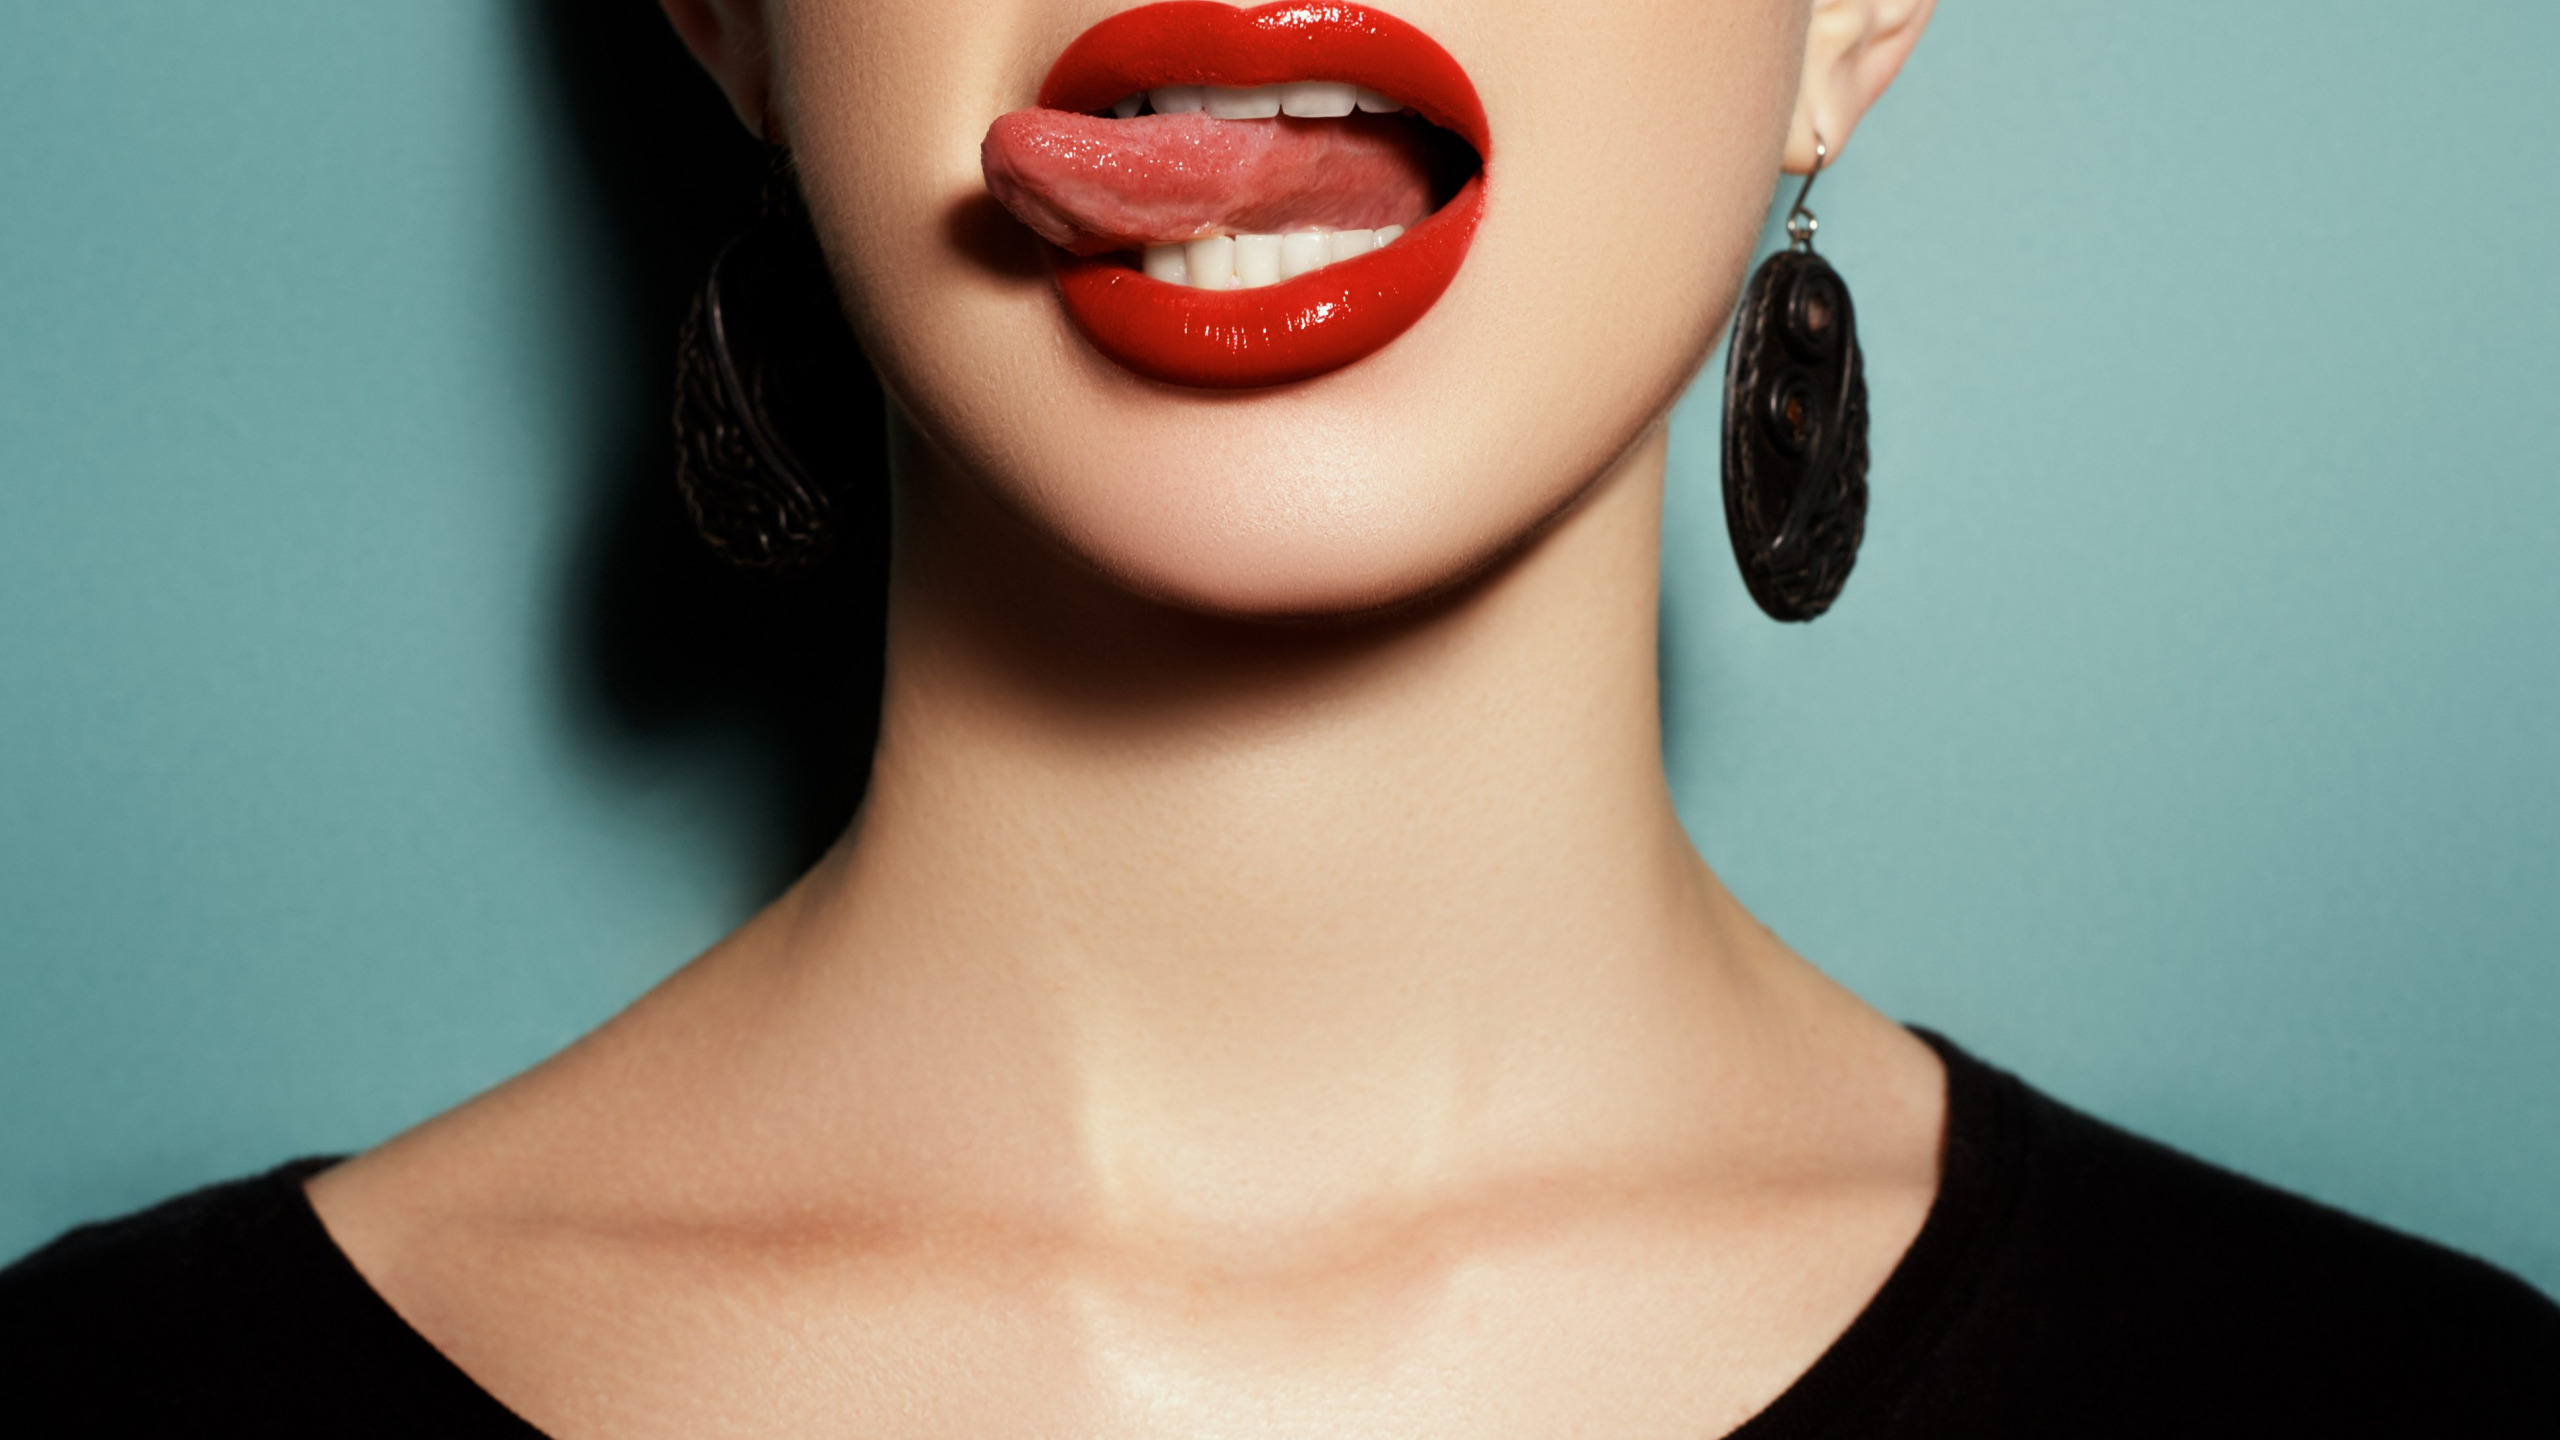 People 2560x1440 women model face mouth open mouth red lipstick tongues tongue out black top simple background juicy lips